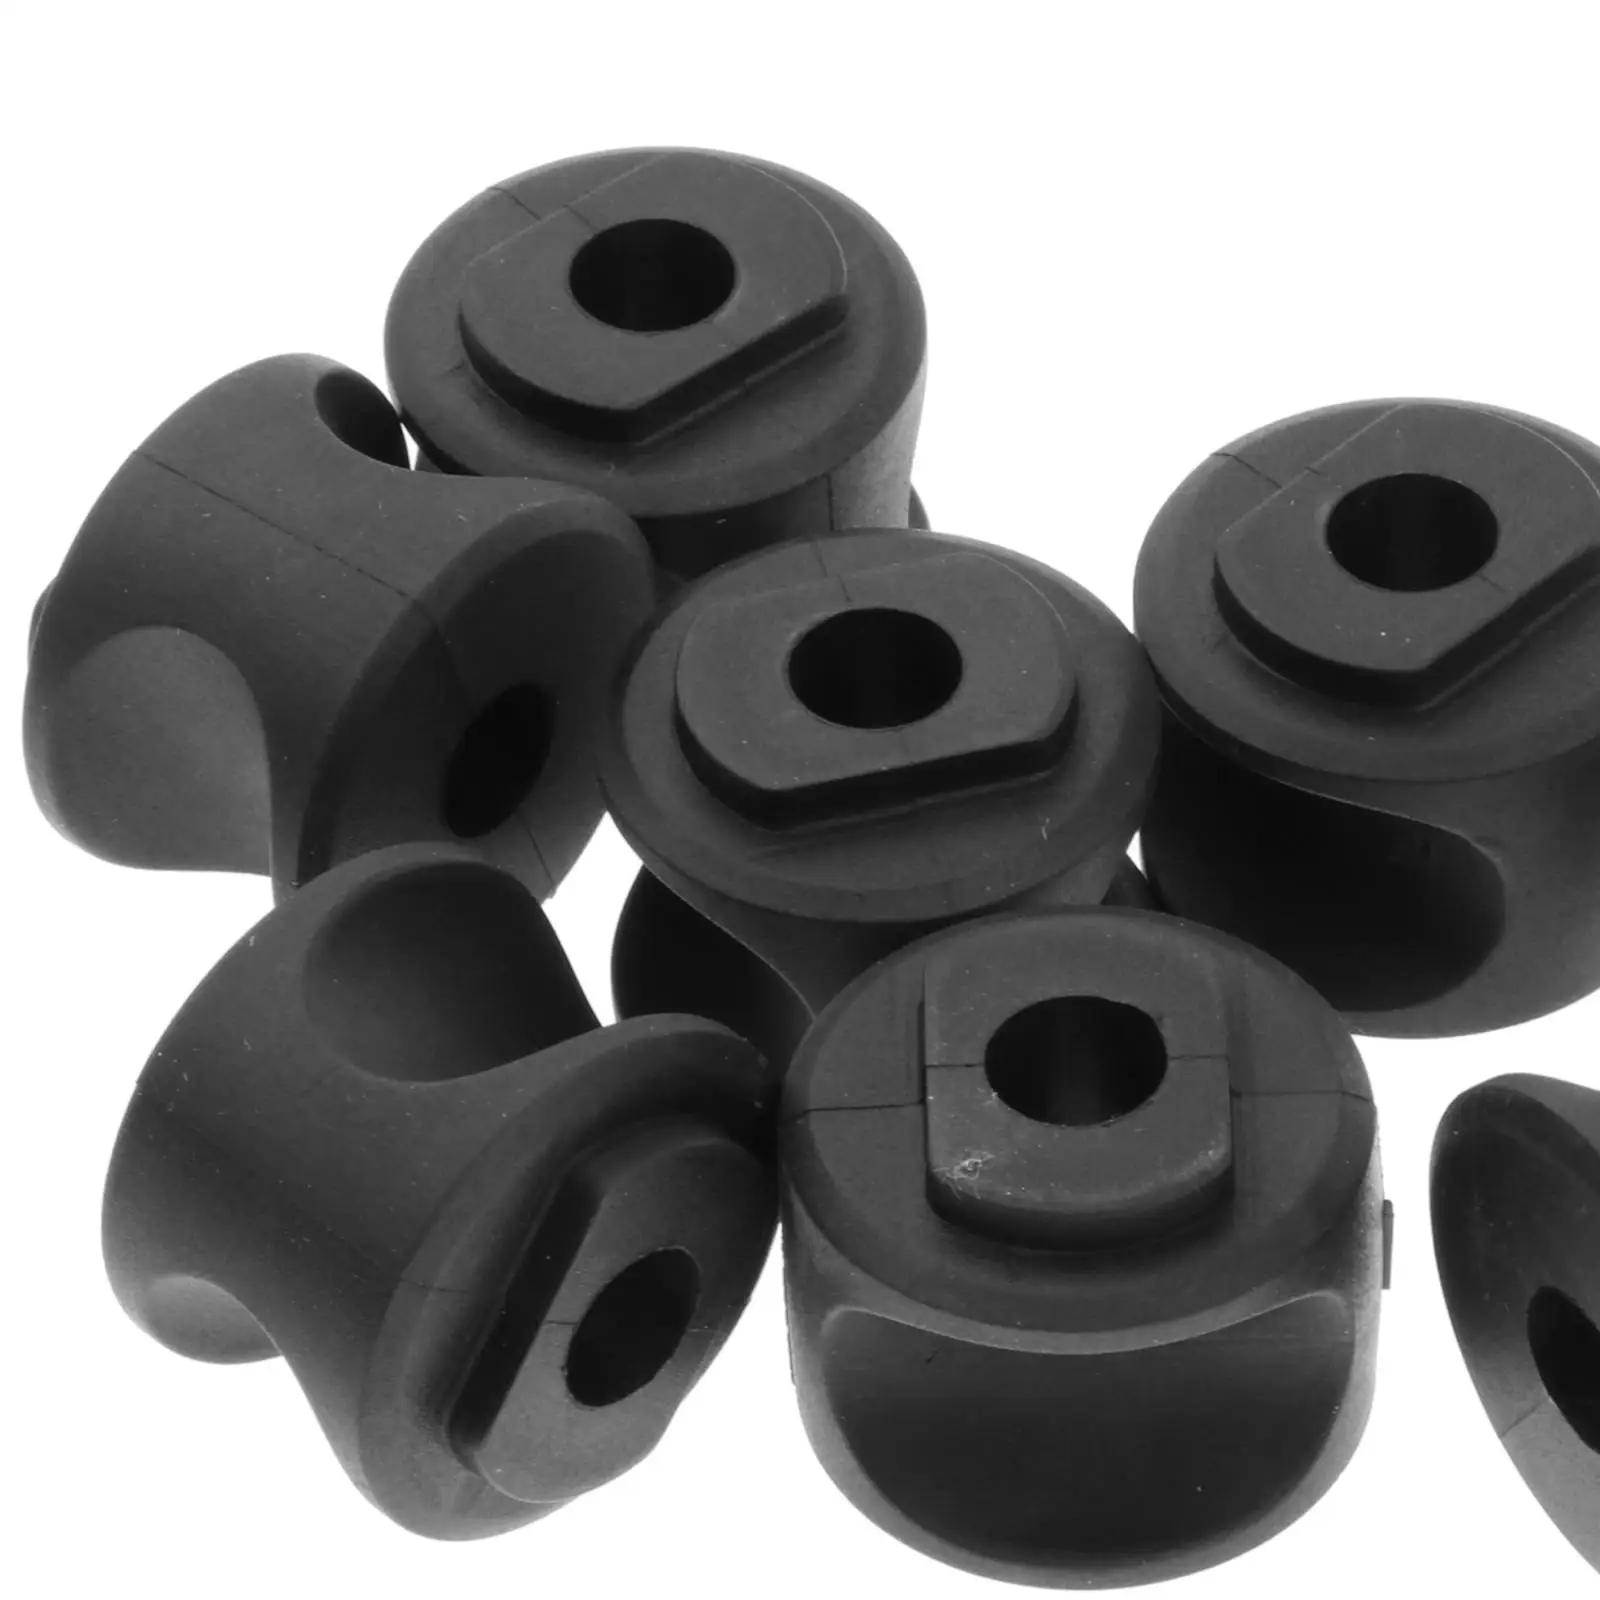 Set of 8 Rear Stabilizer Support Bushing Replacements Car Accessory Kit 31mm Black